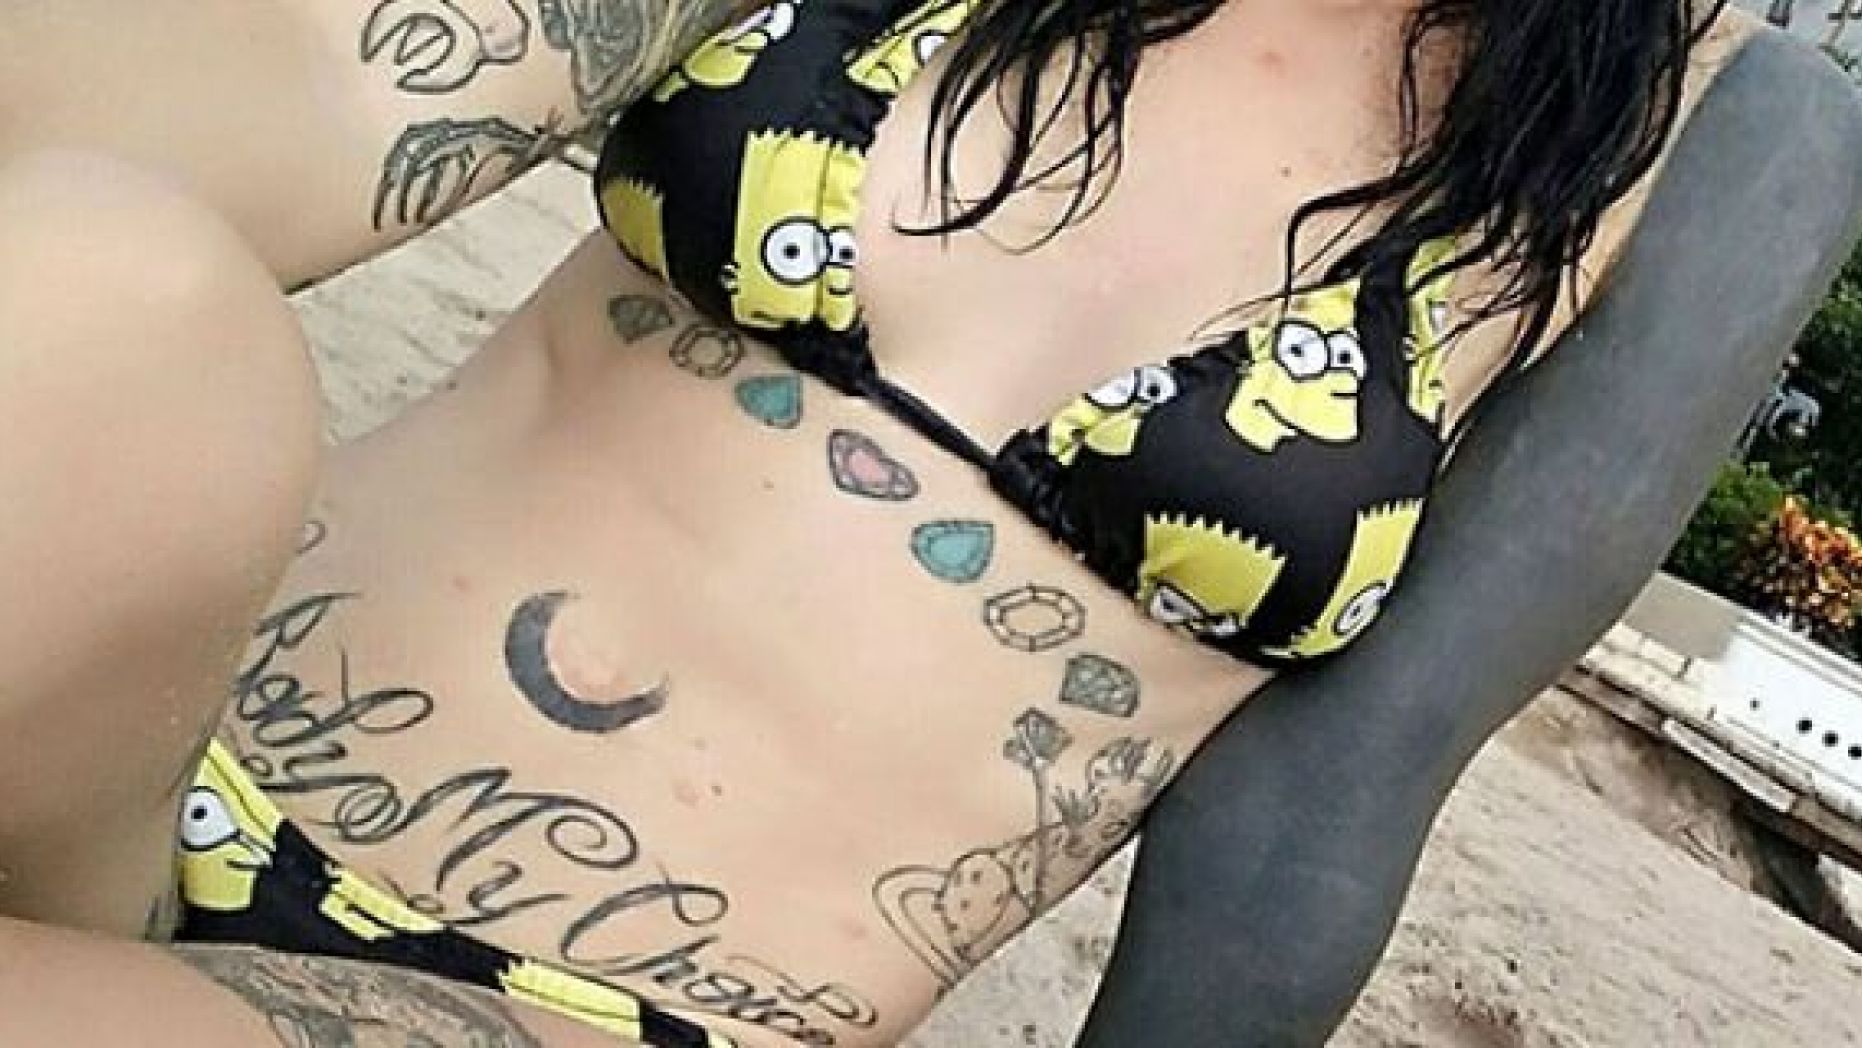 Paulina Casillas Landeros said she had her belly button removed because her family did not approve of her lifestyle.<br data-cke-eol="1">“></picture></div><div class=